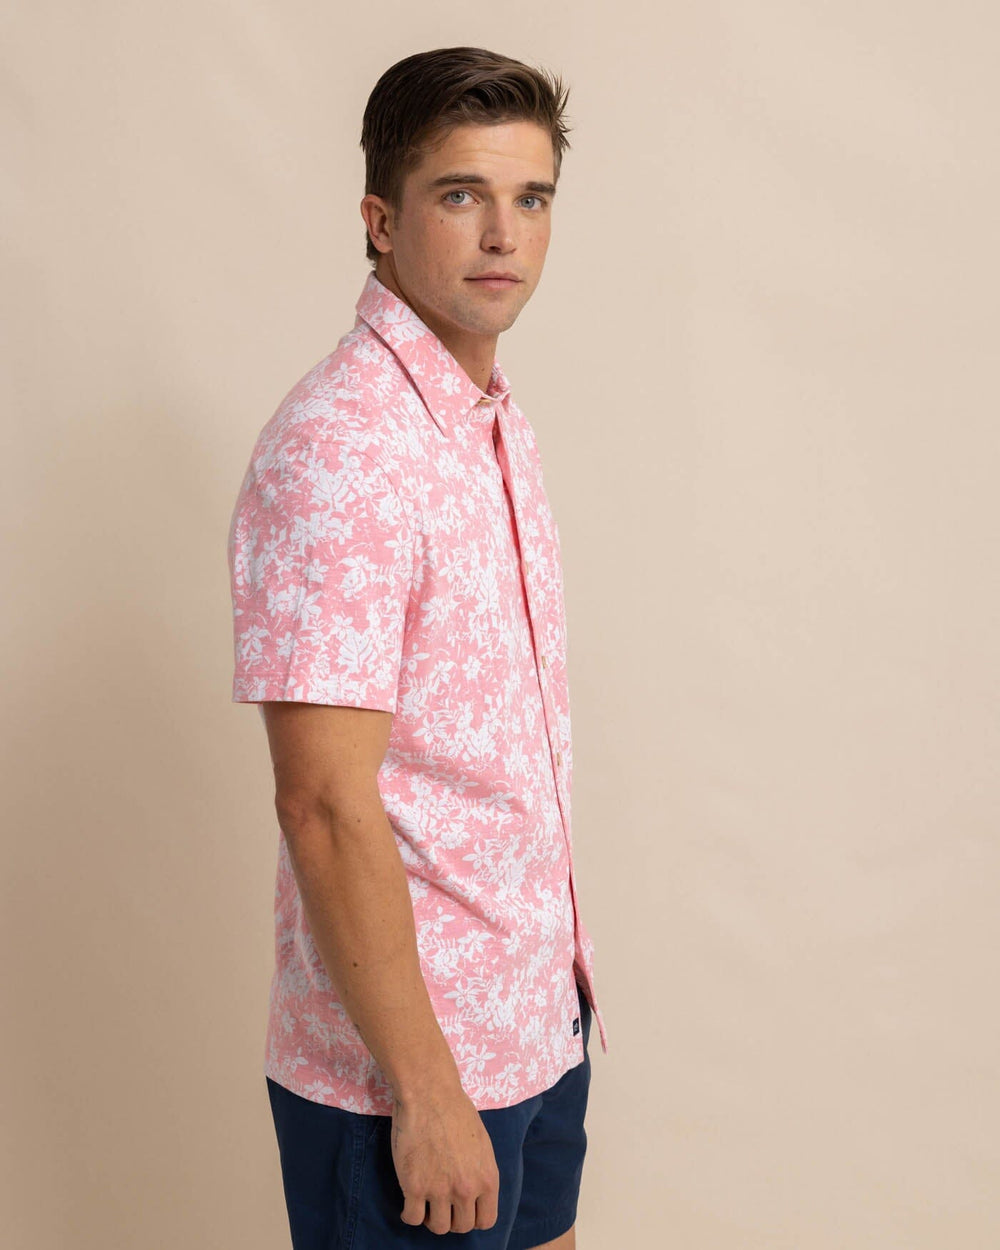 The front view of the Southern Tide Beachcast Island Blooms Knit Short Sleeve Sport Shirt by Southern Tide - Geranium Pink